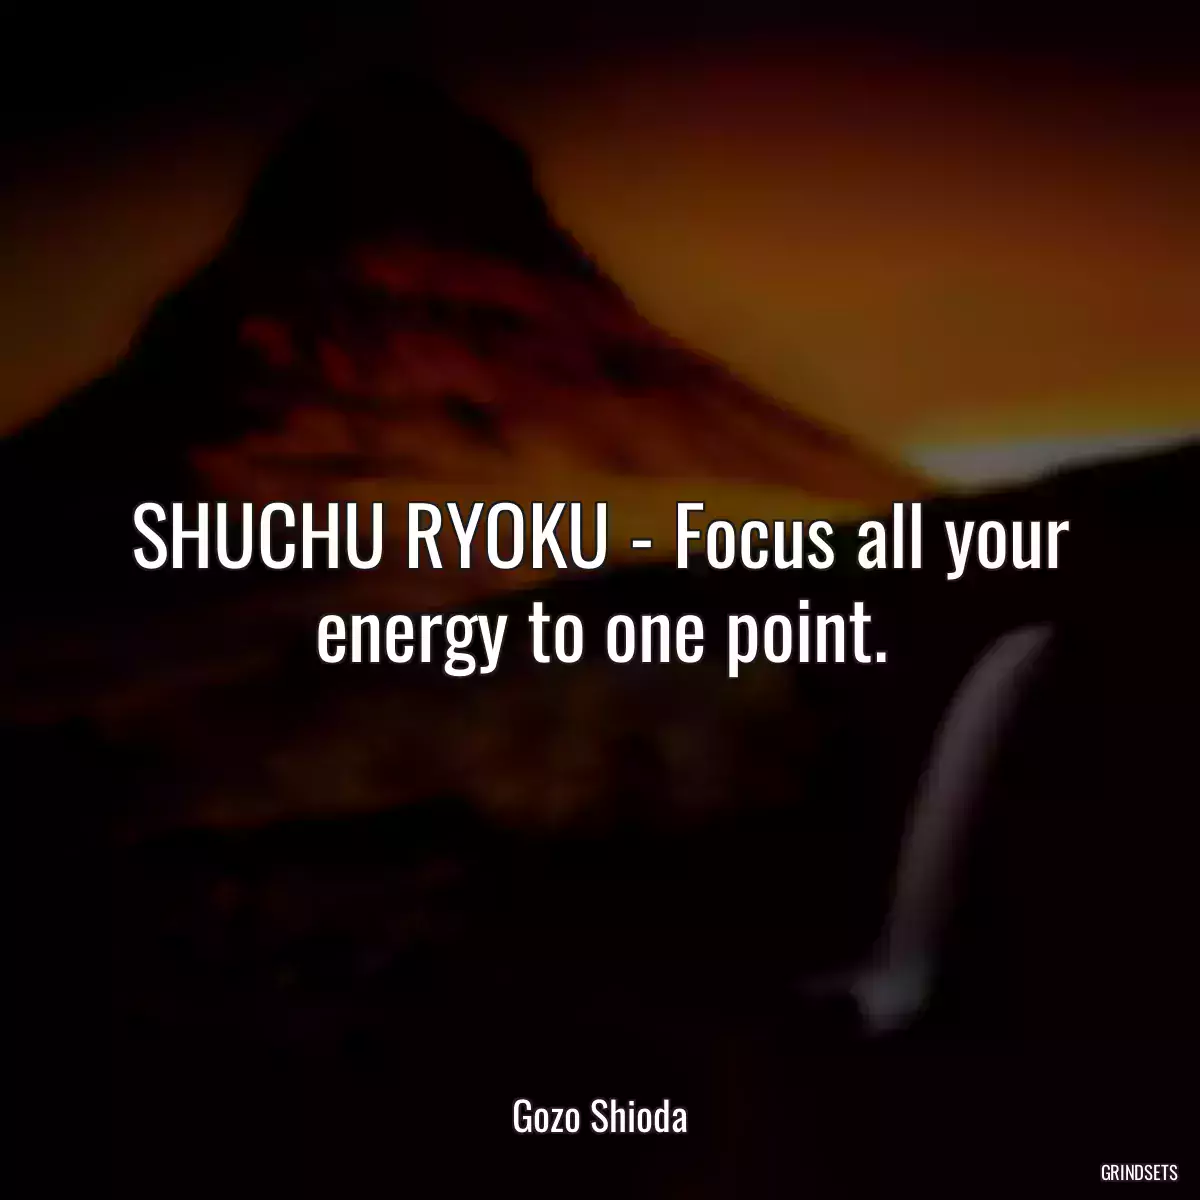 SHUCHU RYOKU - Focus all your energy to one point.